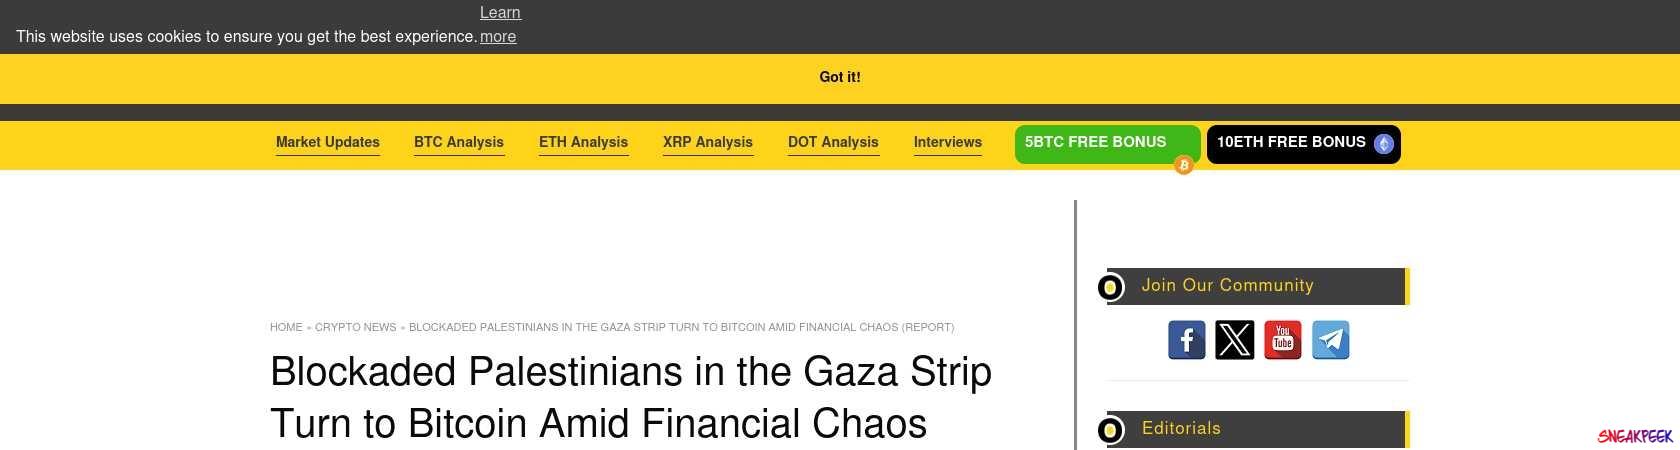 Read the full Article:  ⭲ Blockaded Palestinians in the Gaza Strip Turn to Bitcoin Amid Financial Chaos (Report)